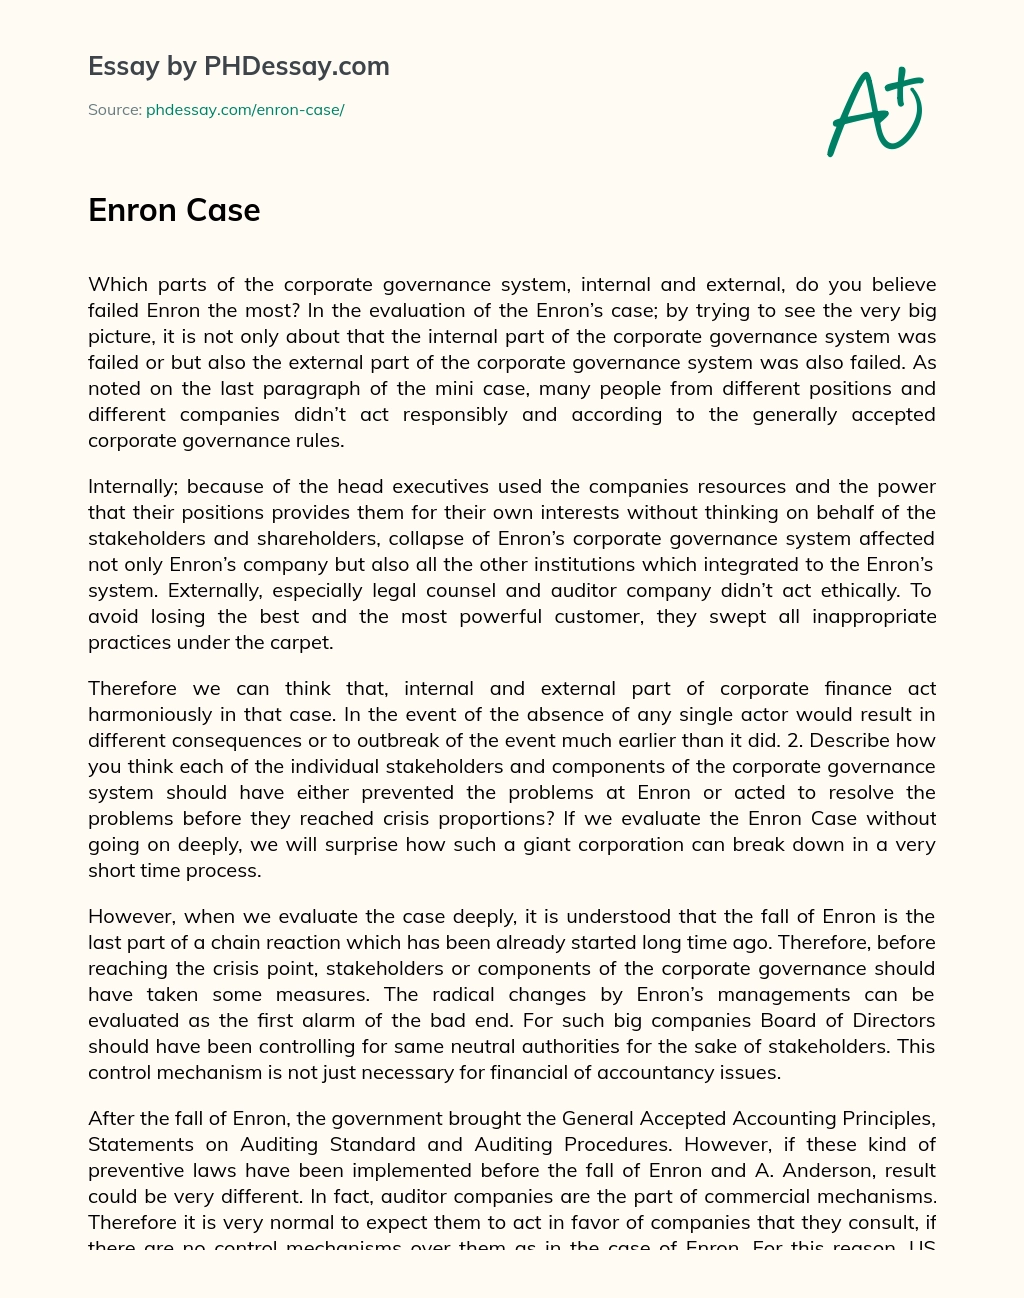 Failures in Enron’s Corporate Governance System: Internal and External Factors essay